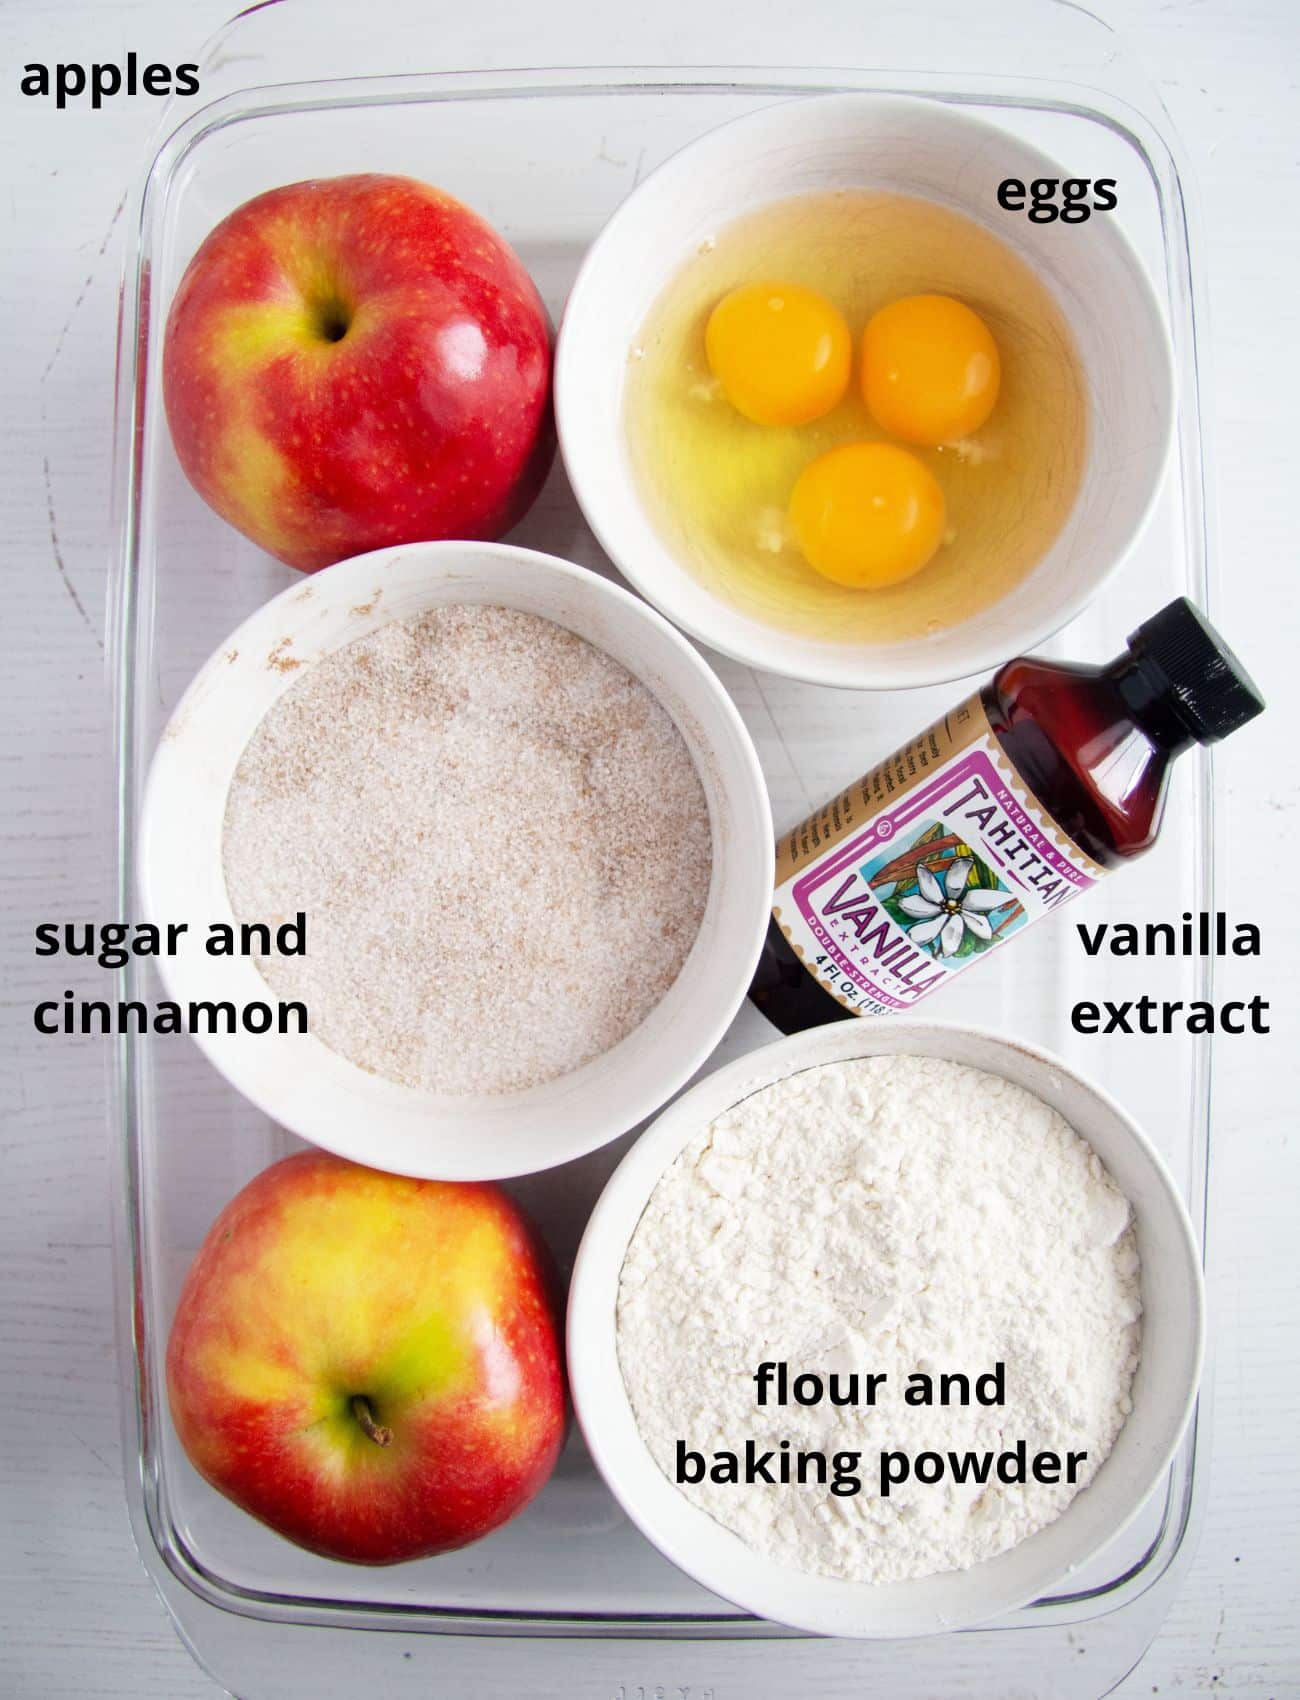 apples, eggs, sugar, flour and vanilla extract in bowls.